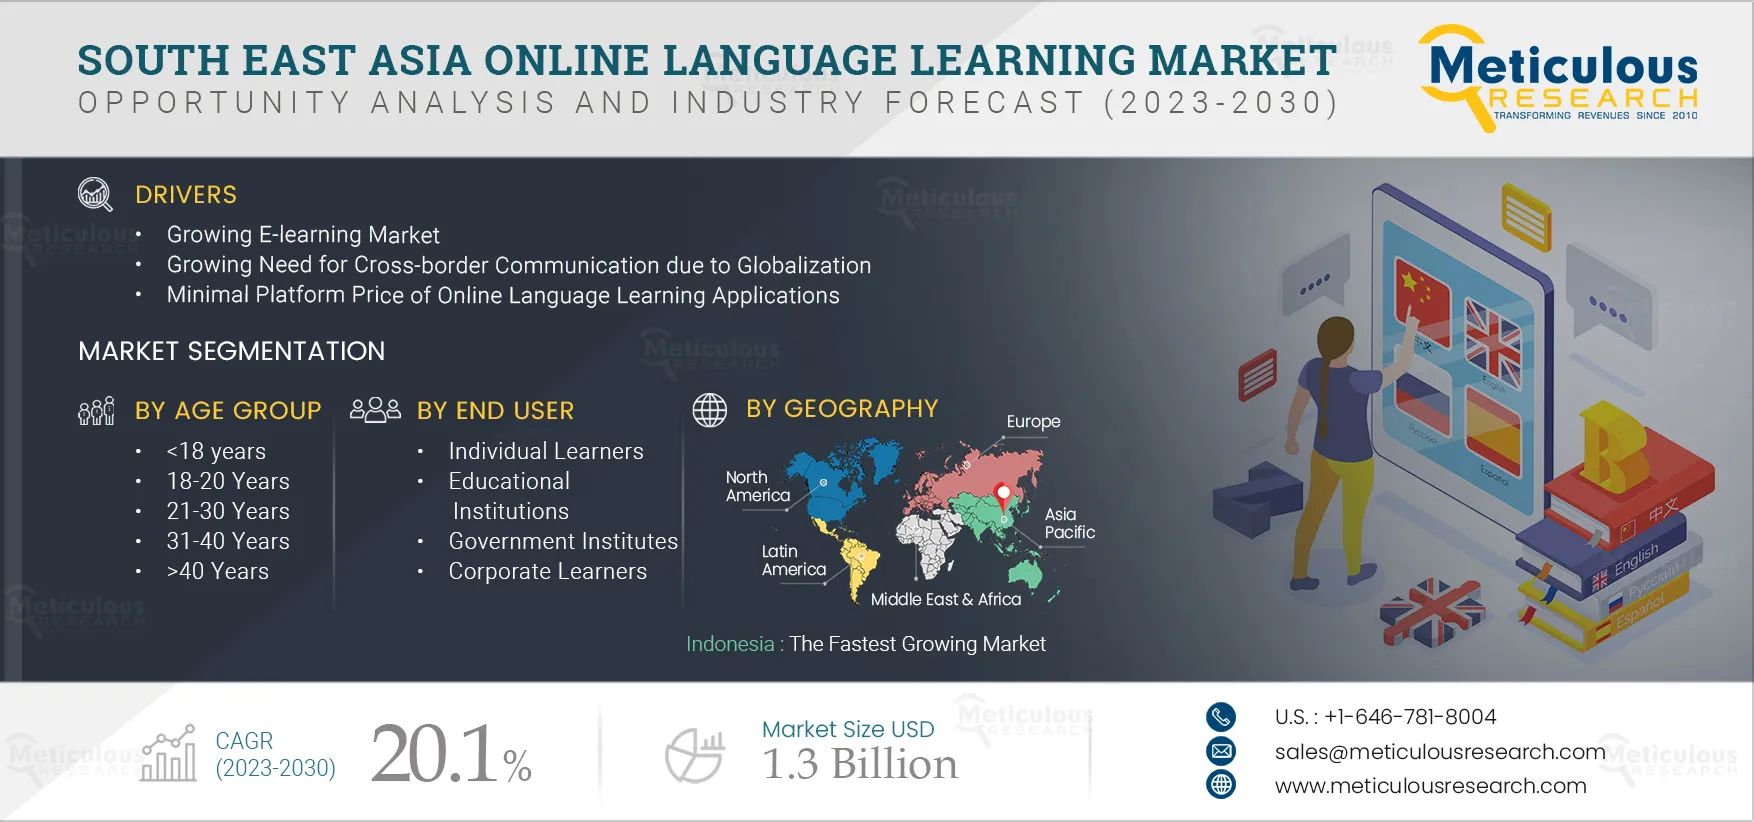 South East Asia Online Language Learning Market